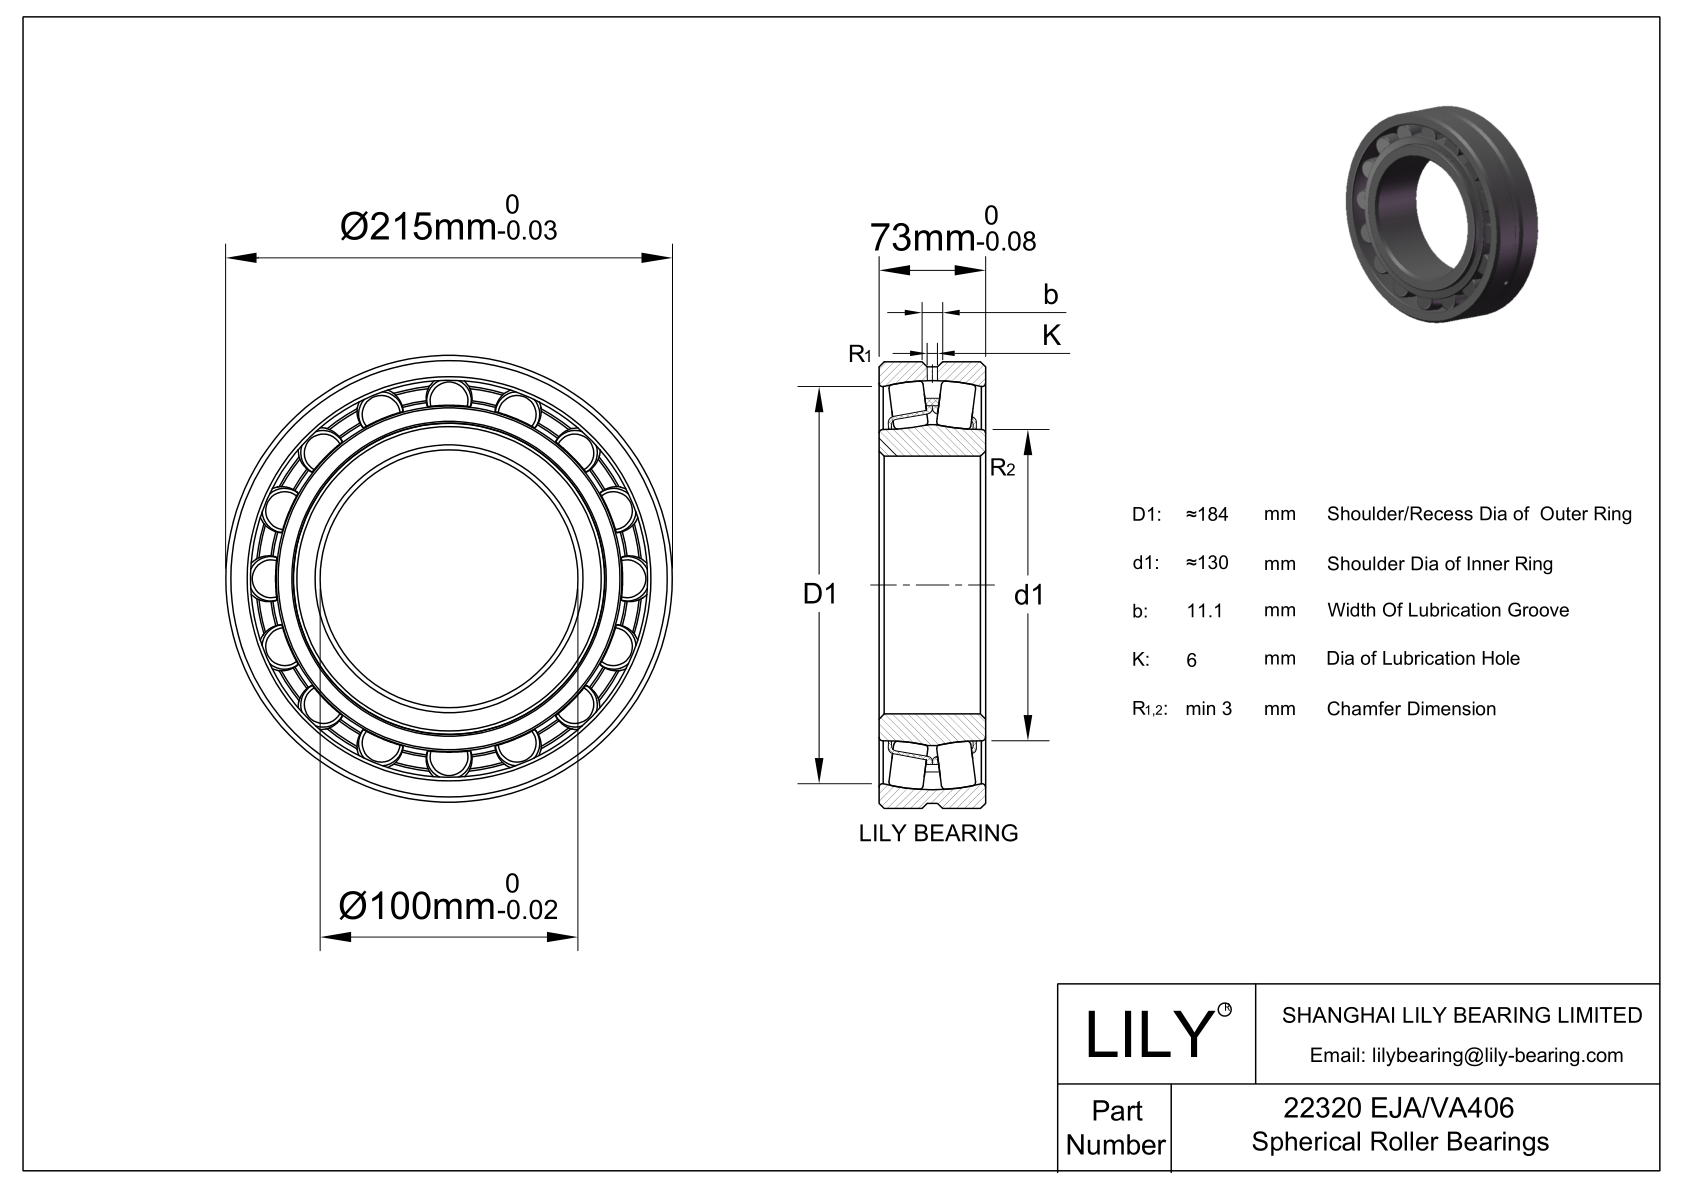 22320 EJA/VA406 Double Row Spherical Roller Bearing cad drawing